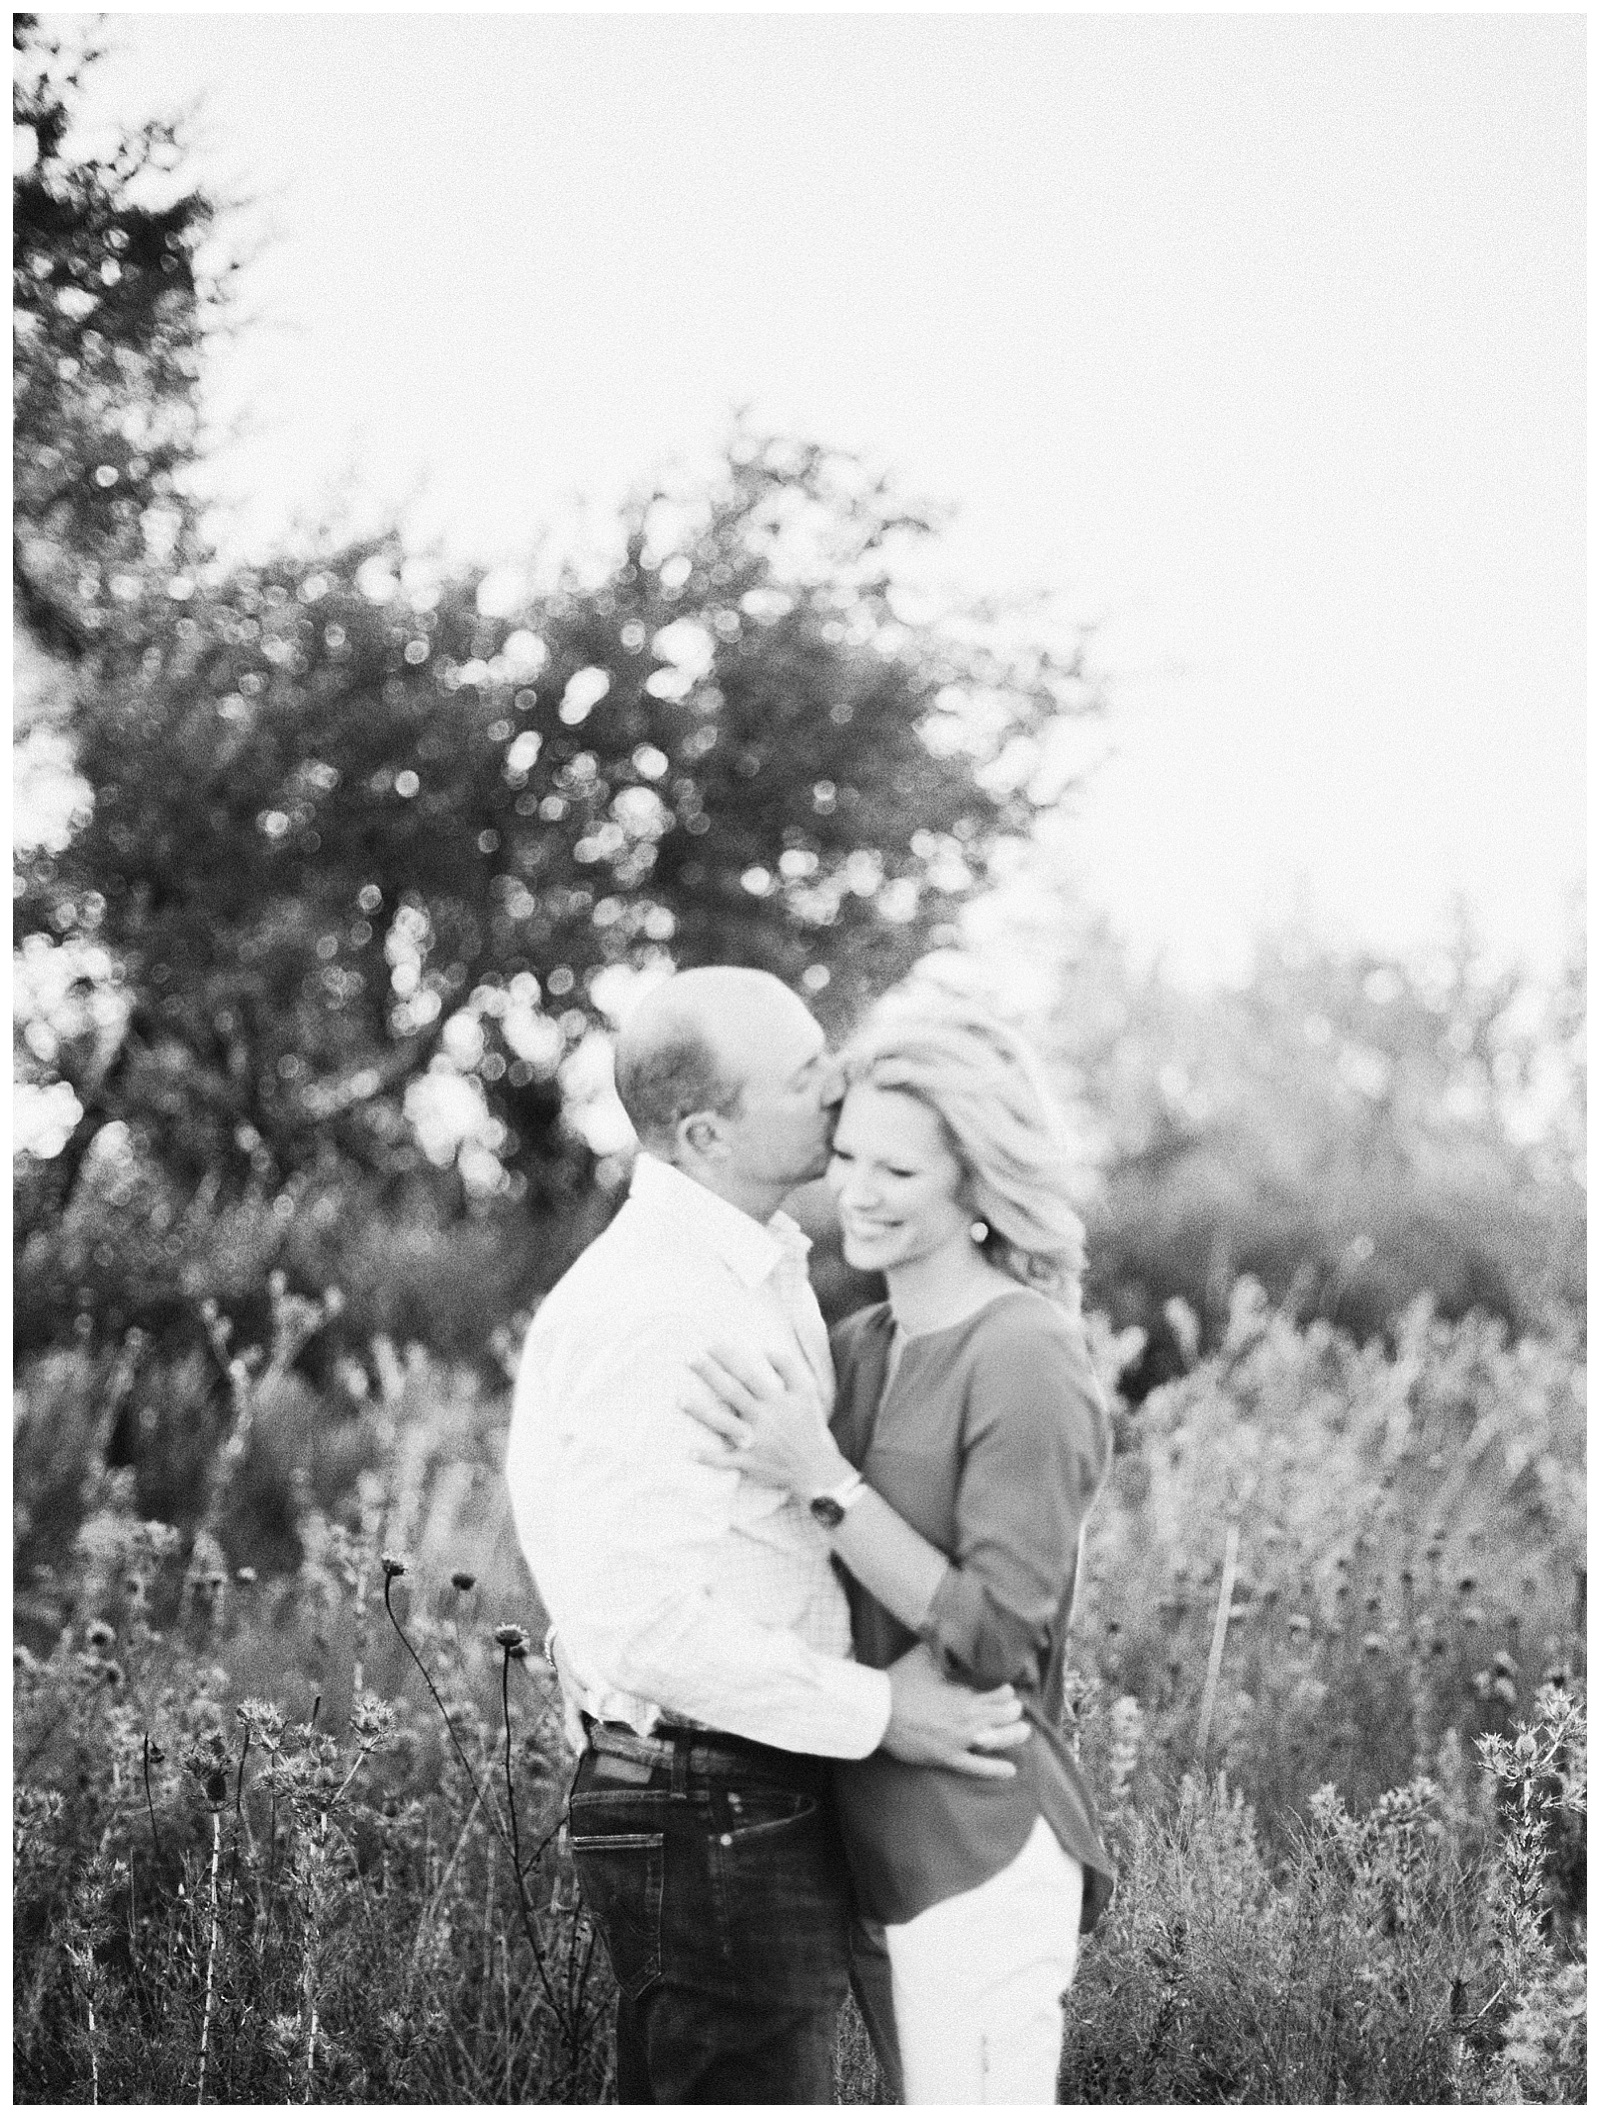 Private ranch engagement session in Decatur texas